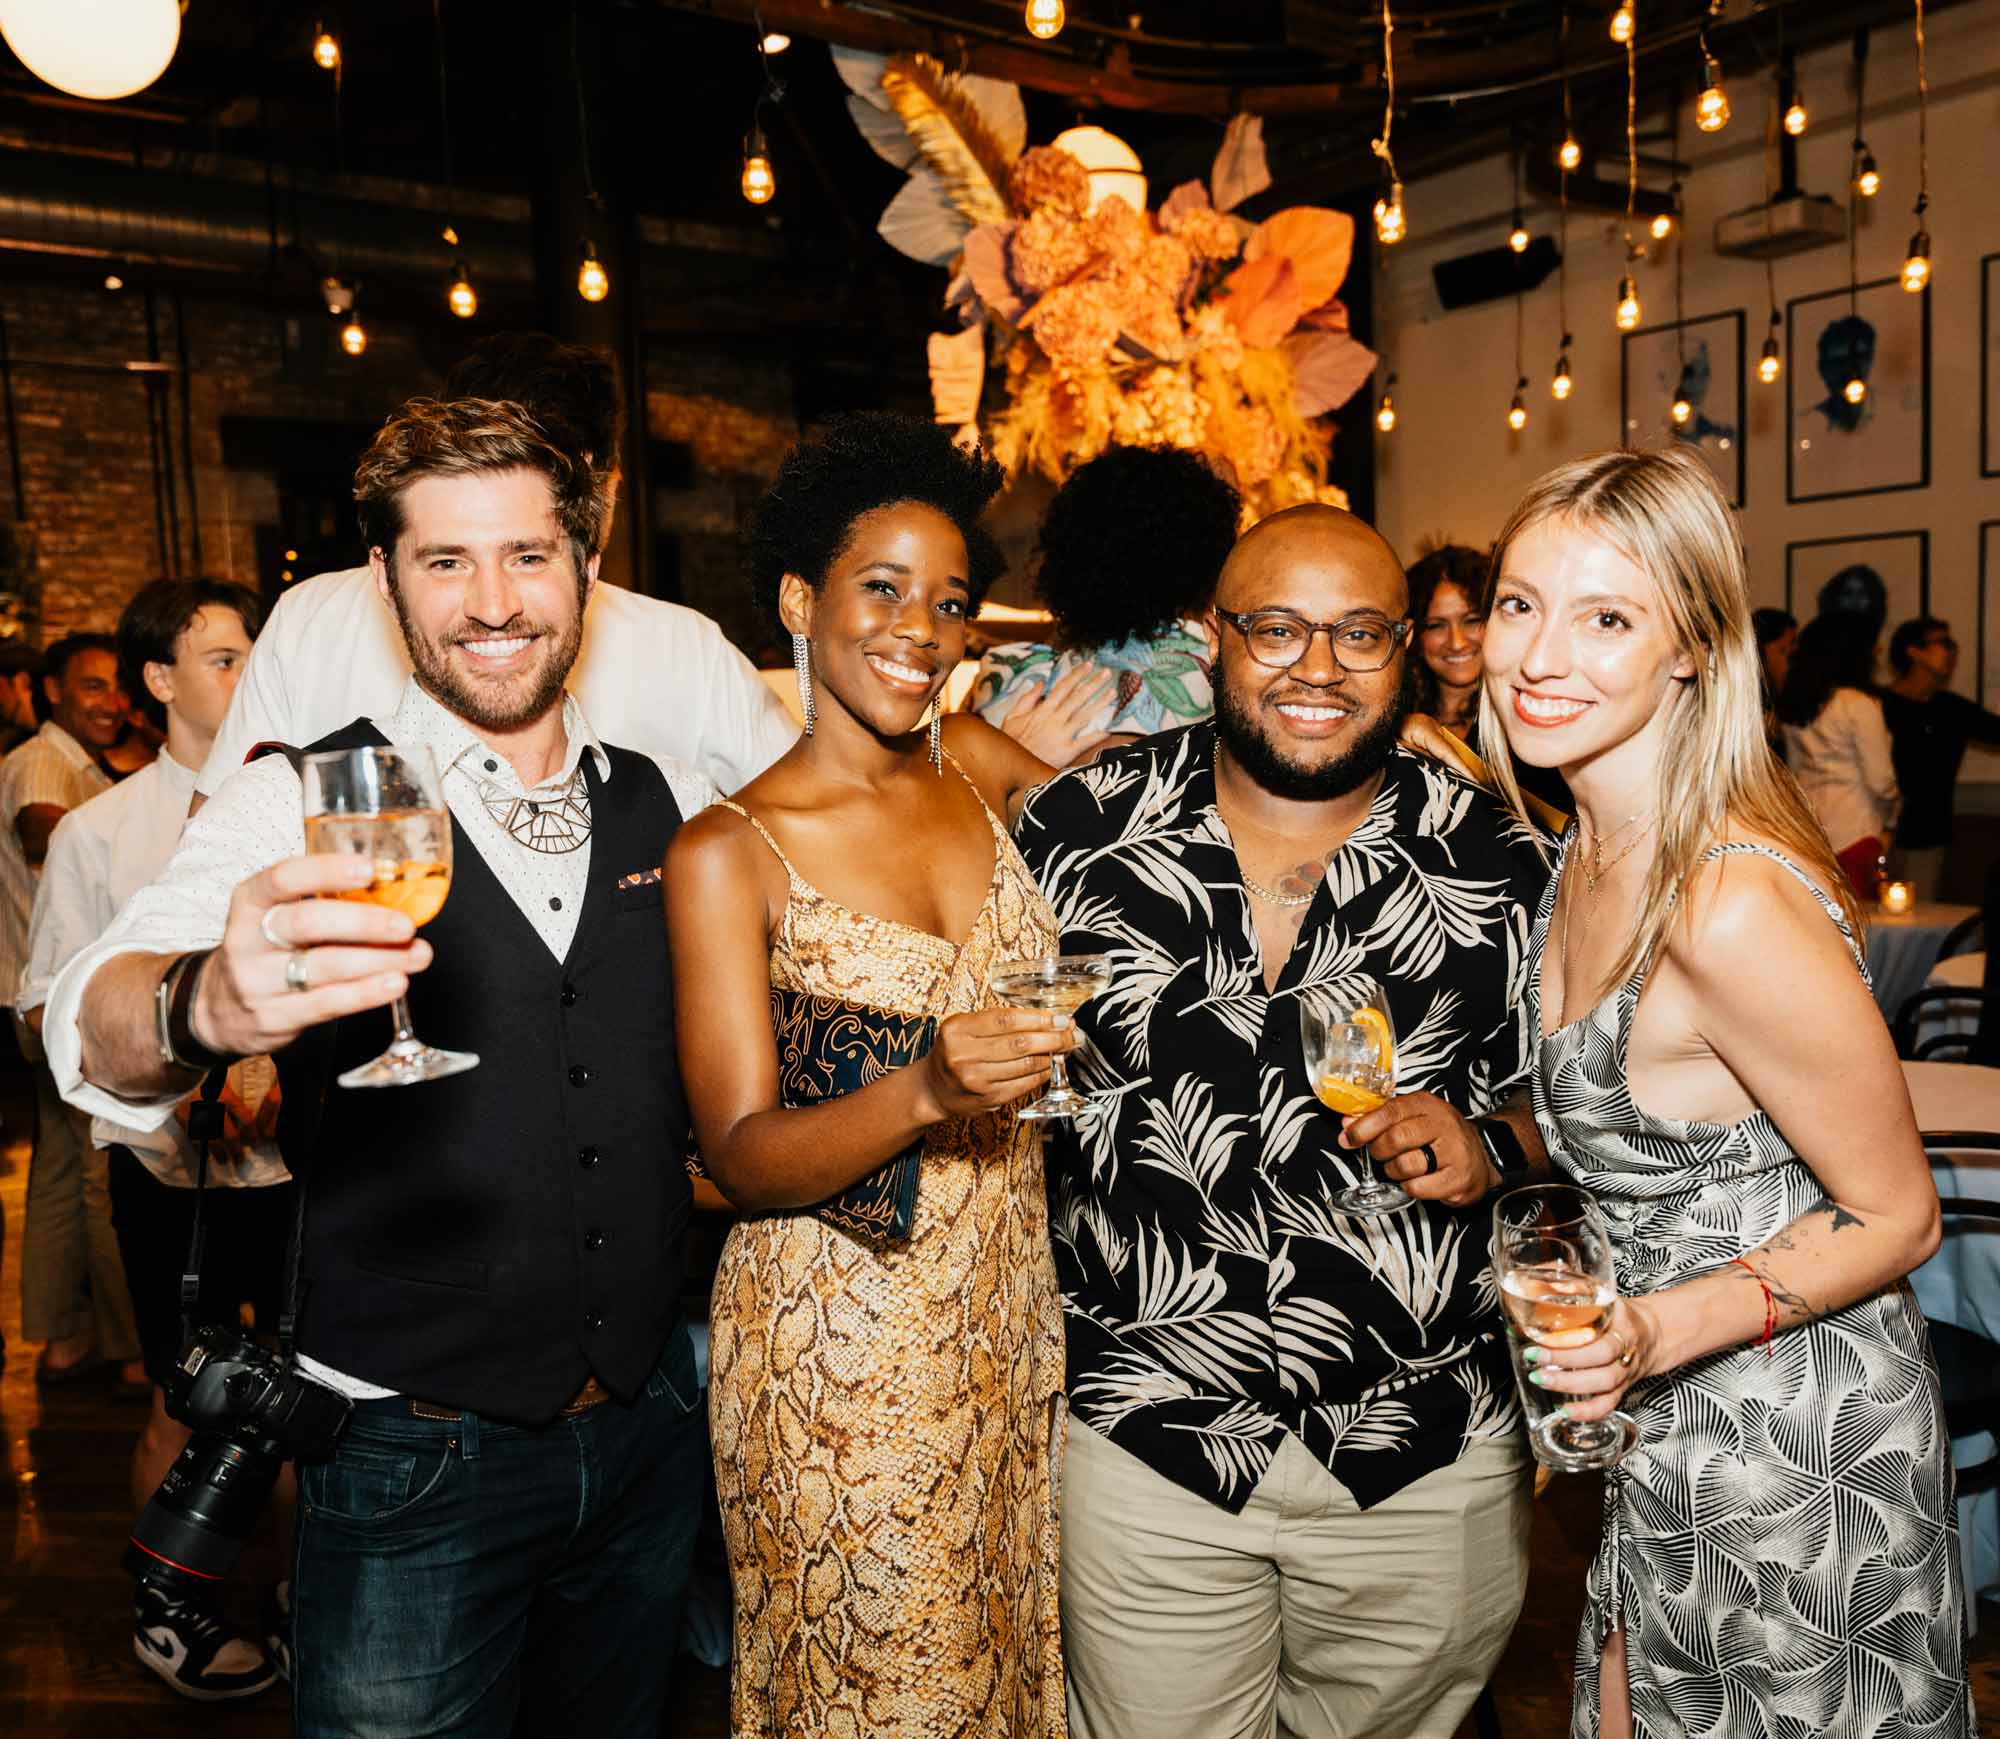 The Wythe Hotel Turns 10 by Ernesto Roman | A Hotel Life